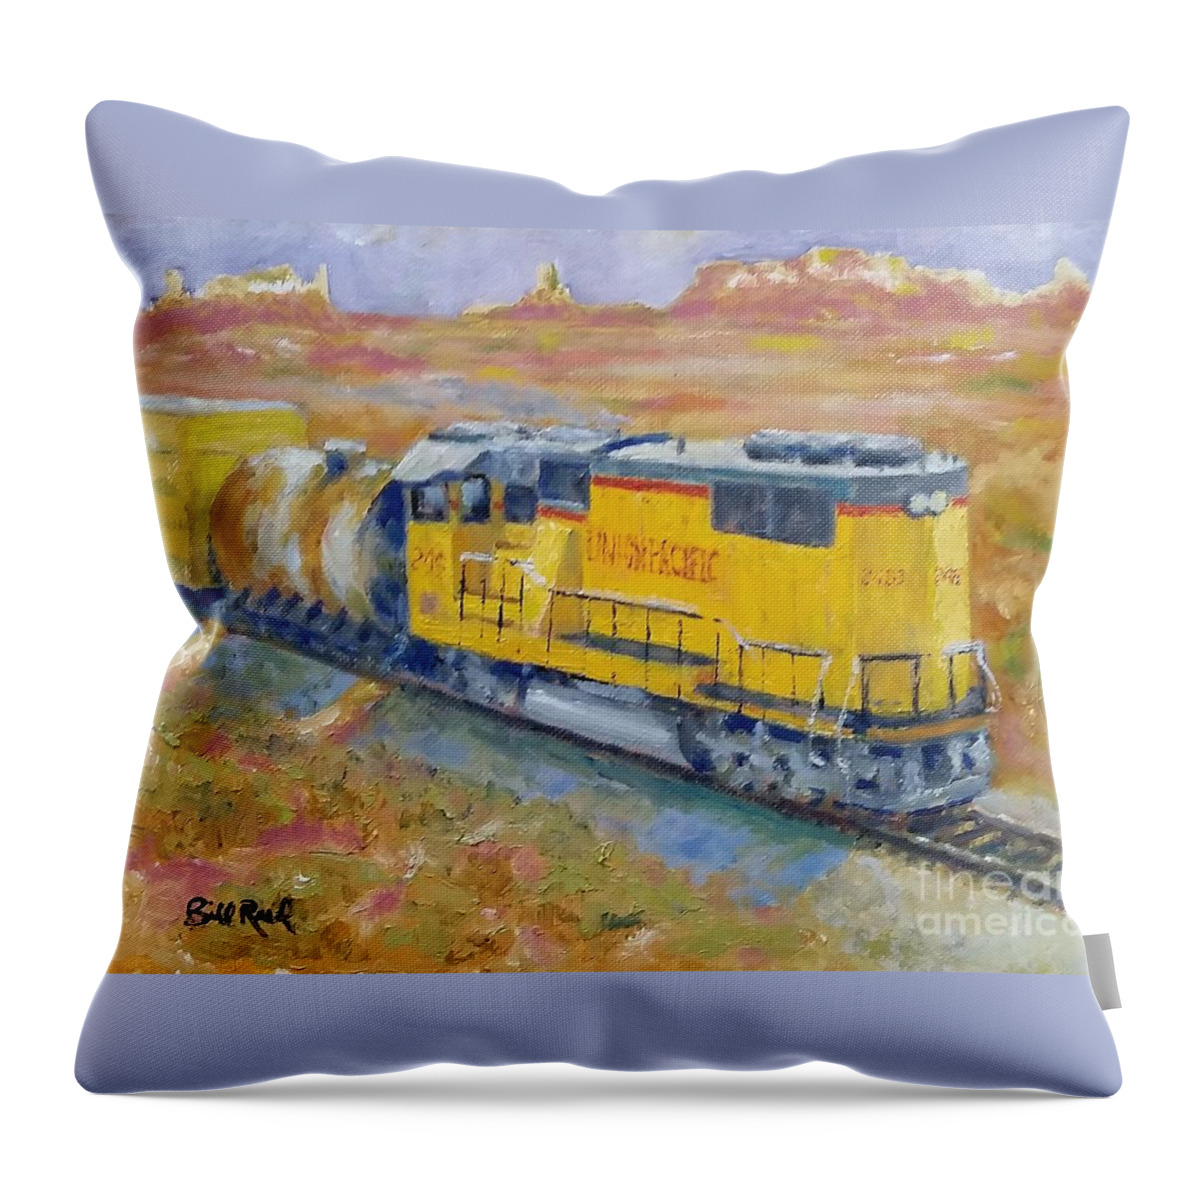 Train Throw Pillow featuring the painting South West Union Pacific by William Reed